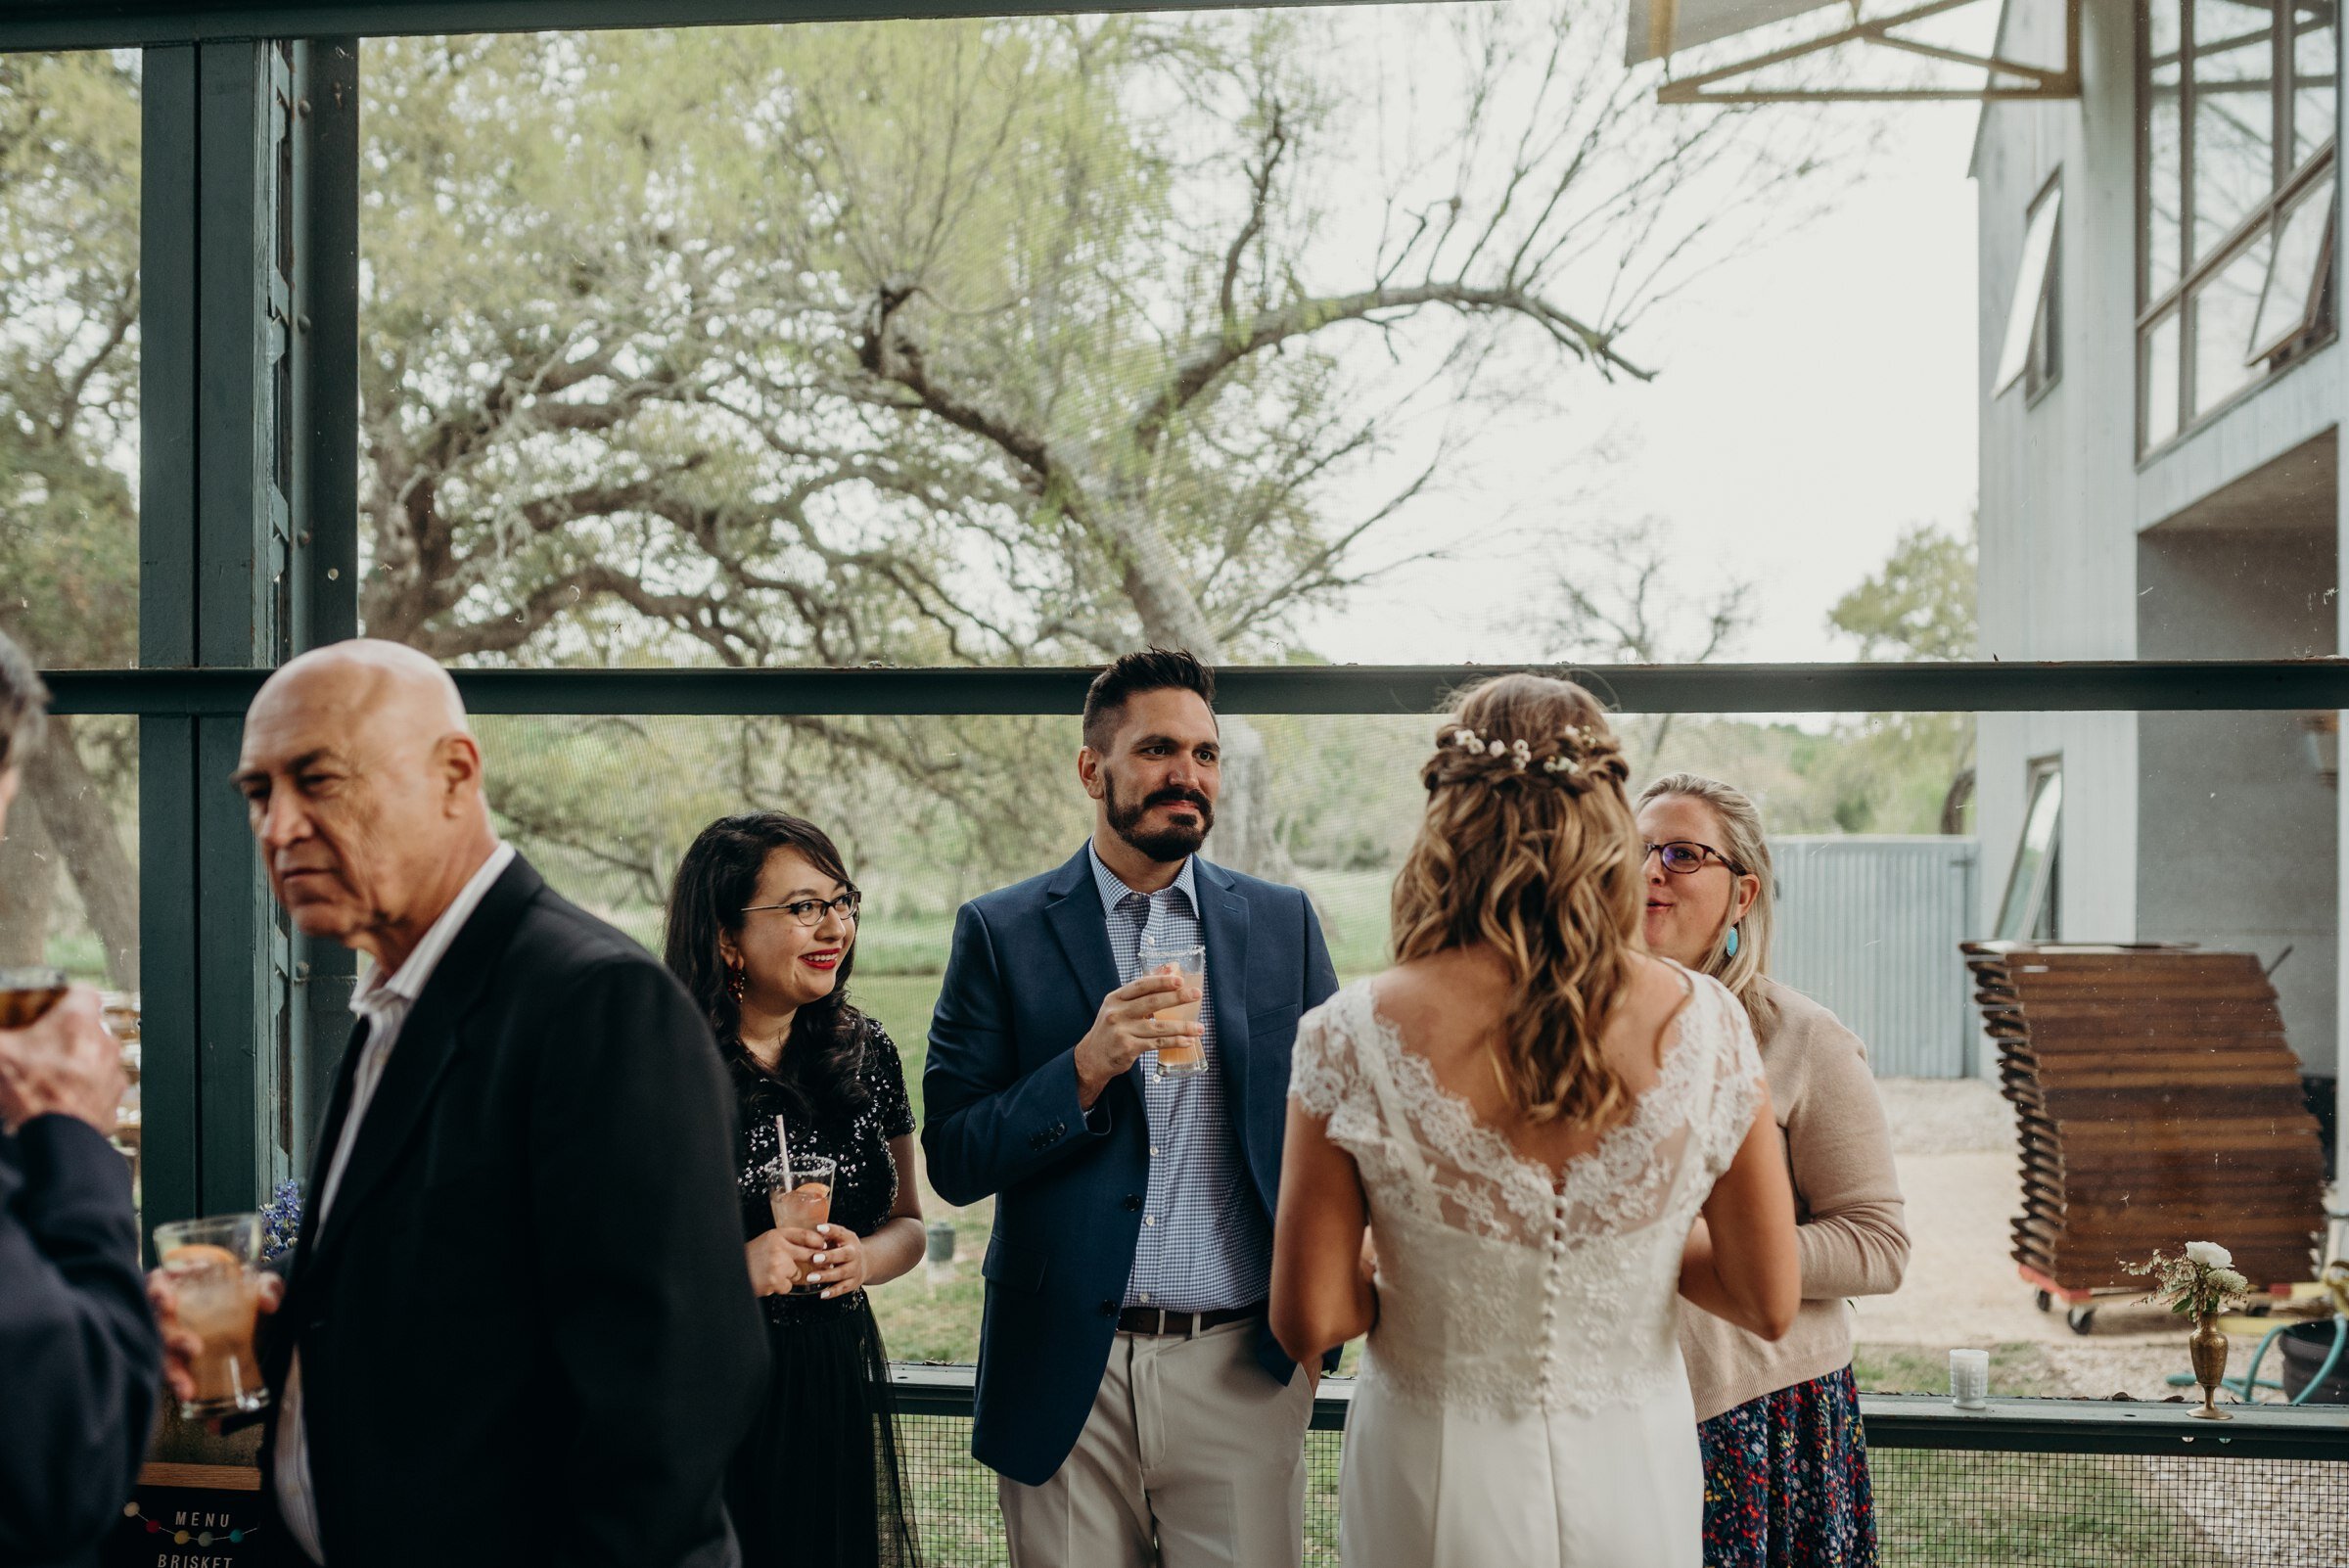  guests during reception at wedding in austin texas 